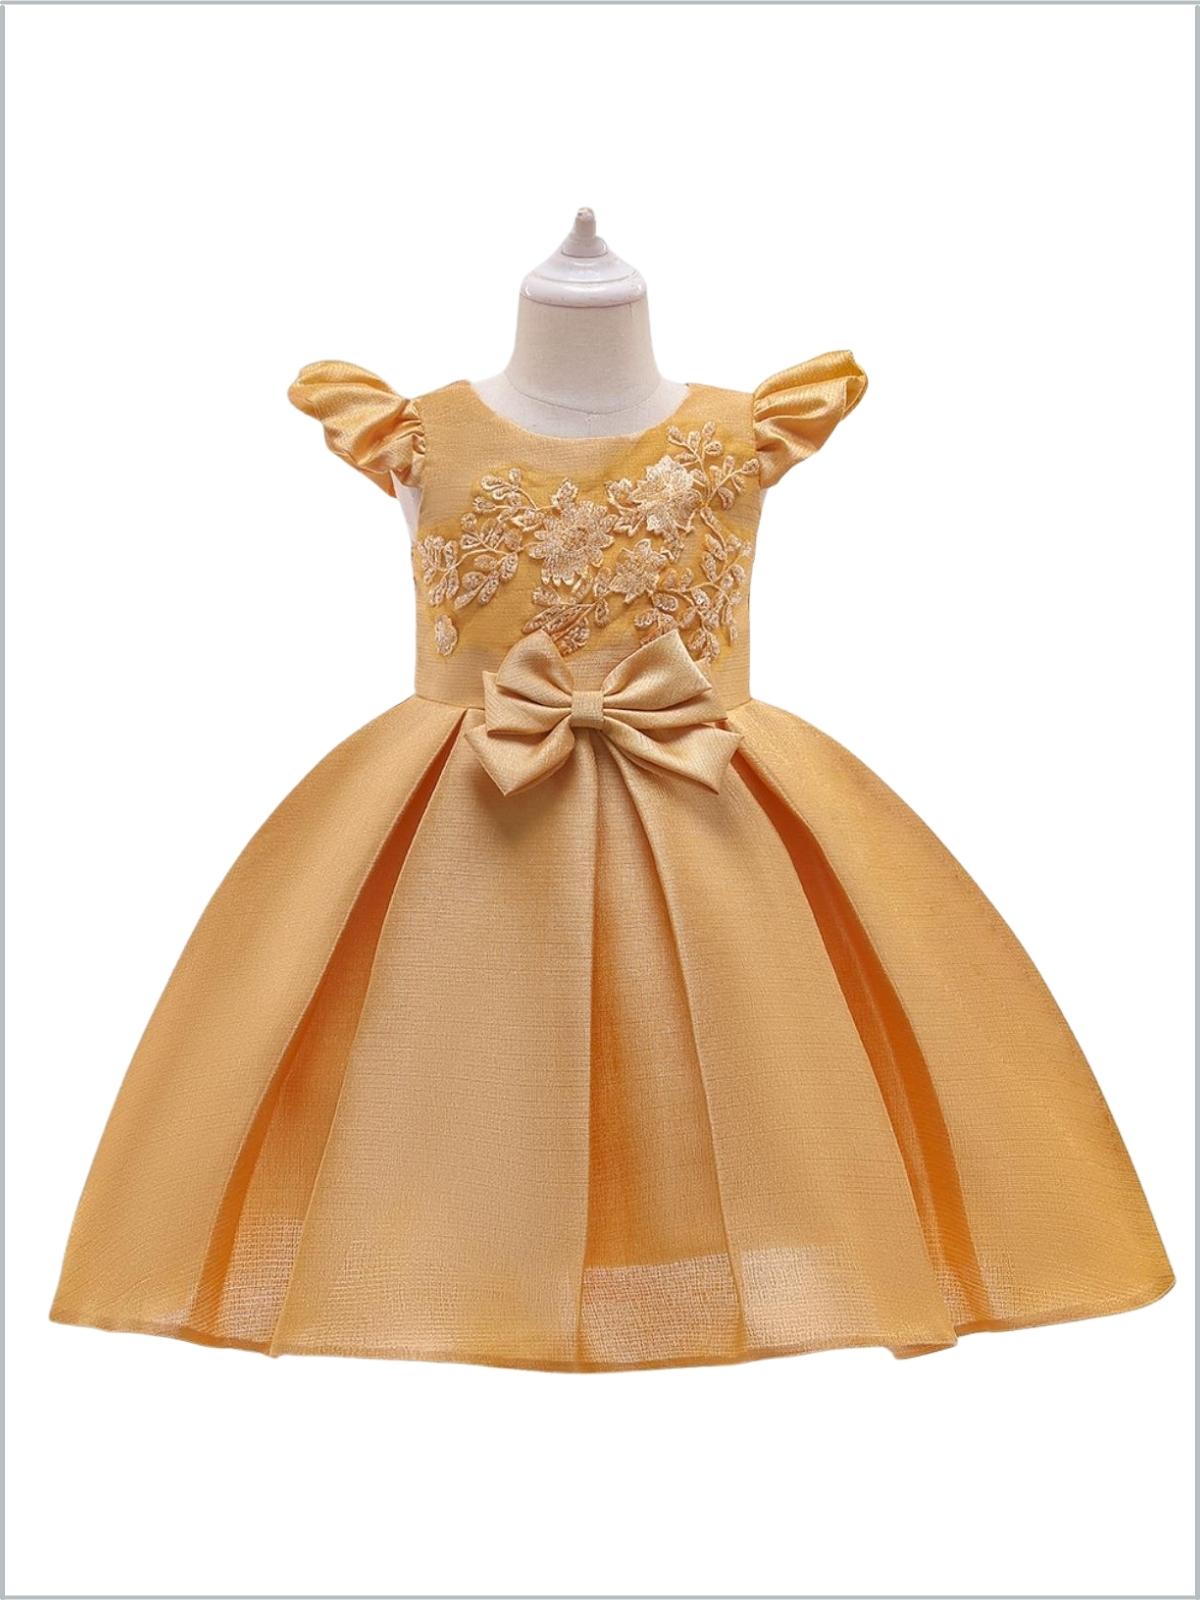 Girls Winter Formal Dress | Embroidered Holiday Dress | Mia Belle Girls